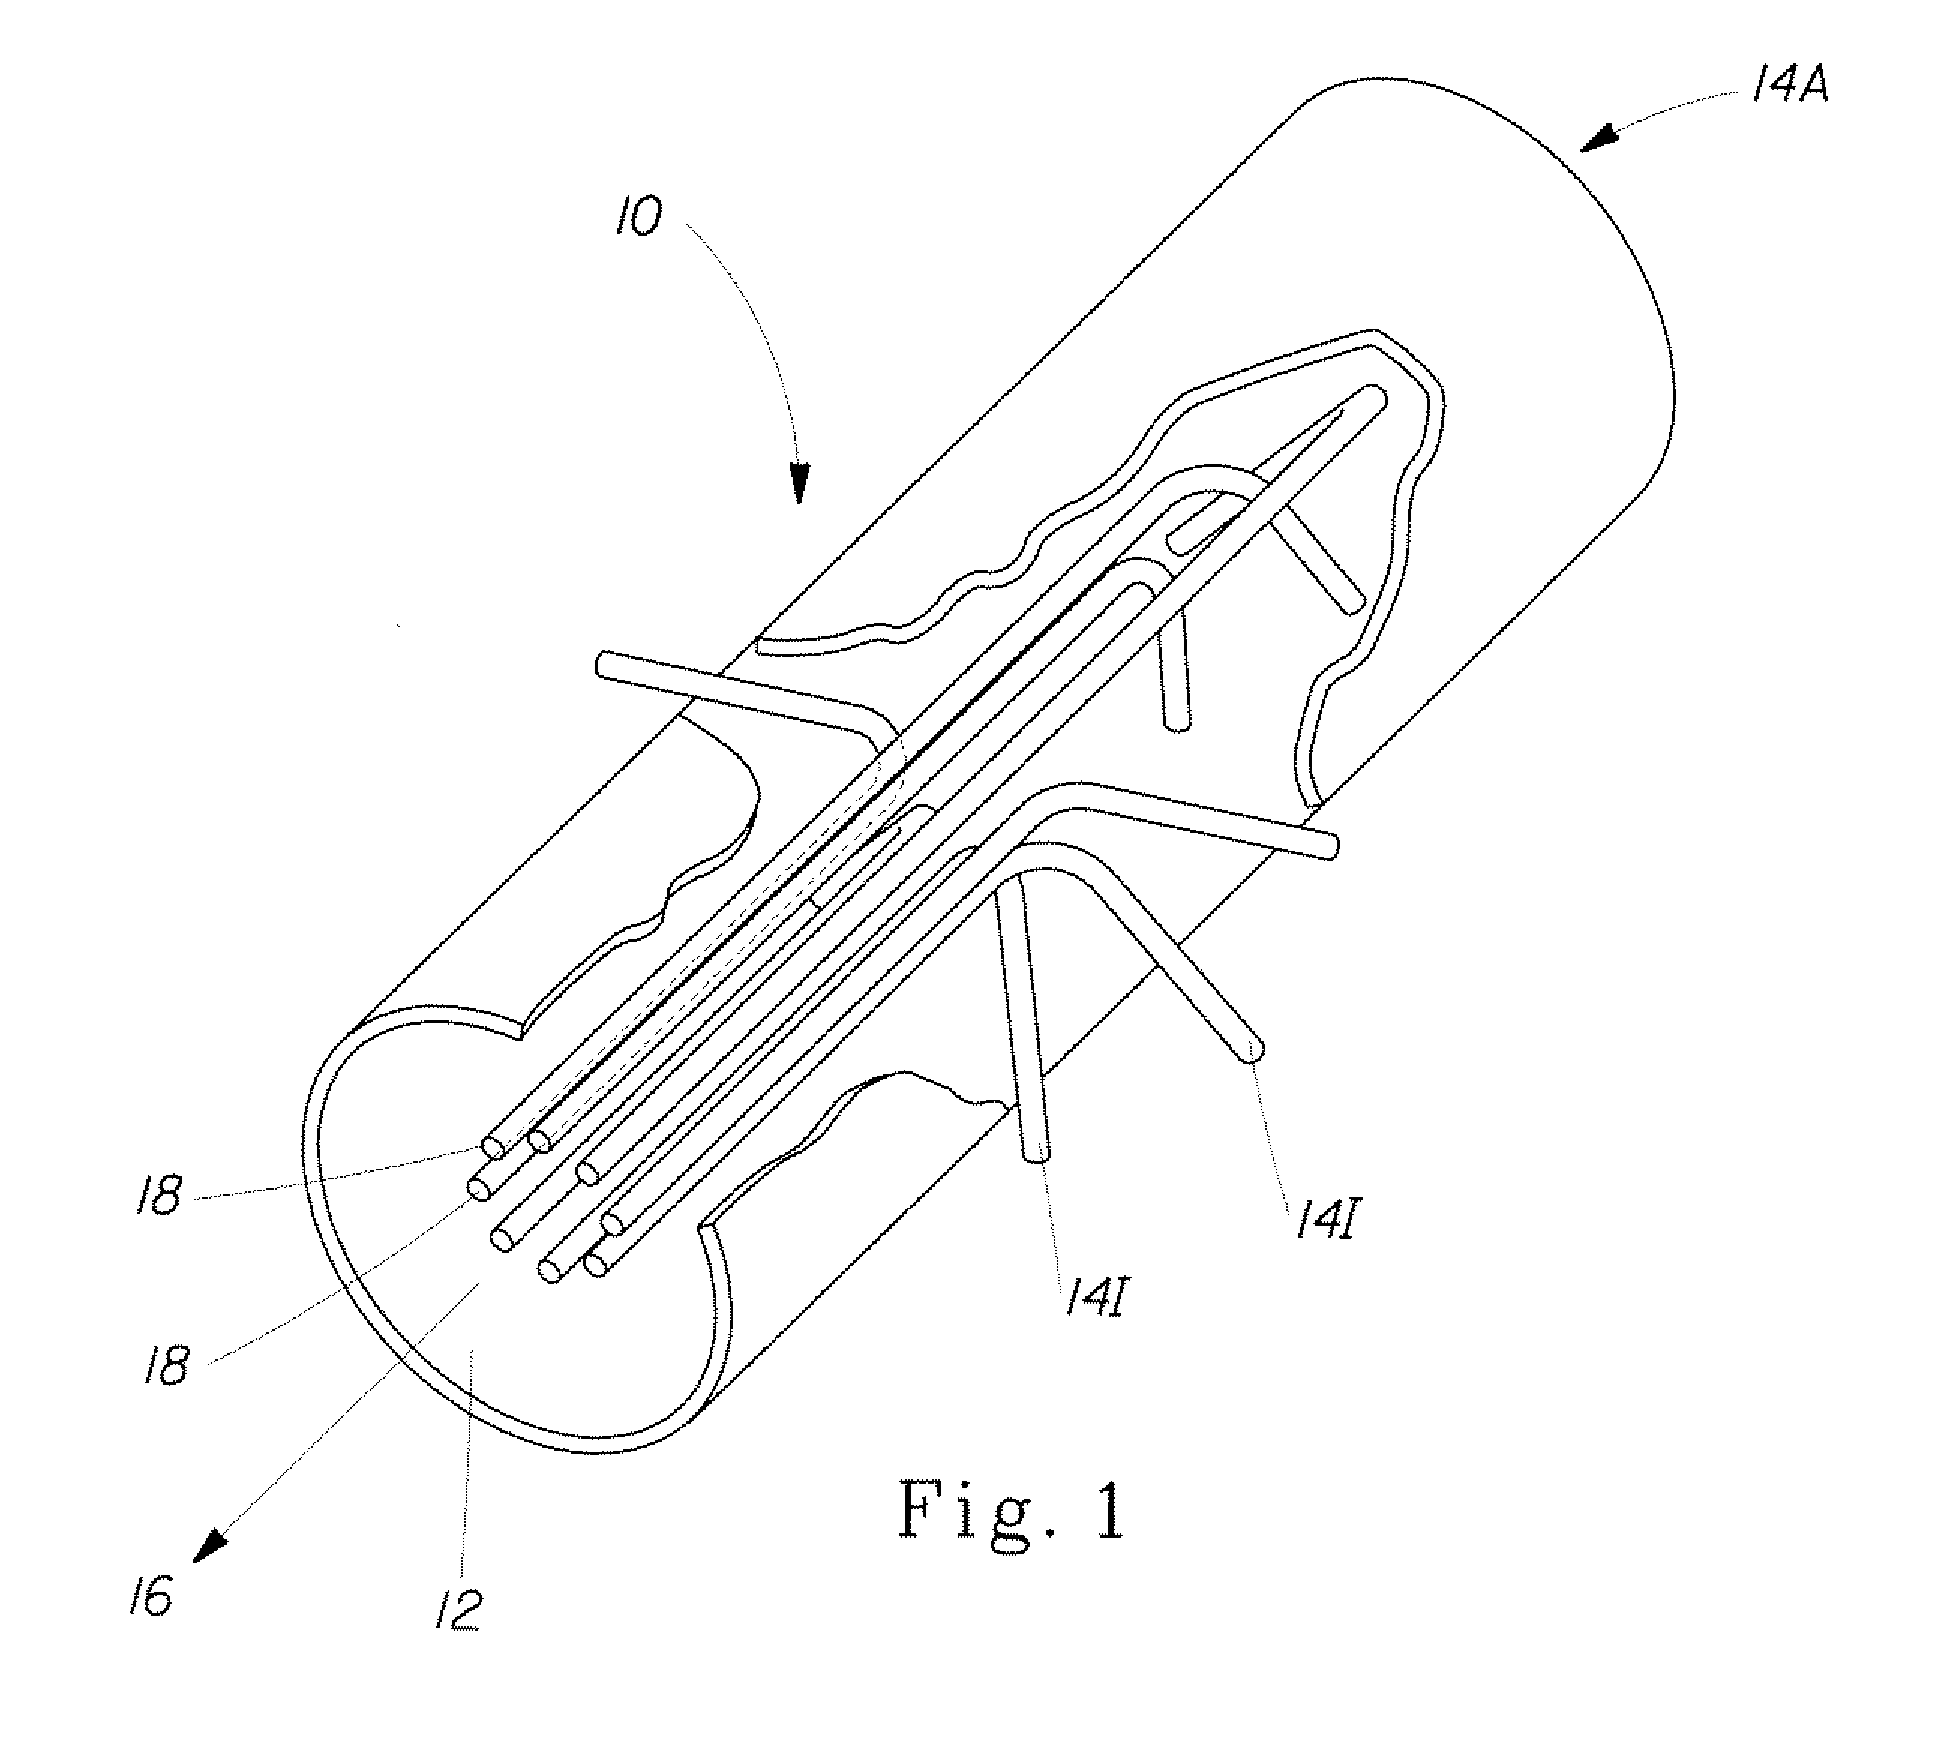 Control System For and Method of Combining Materials